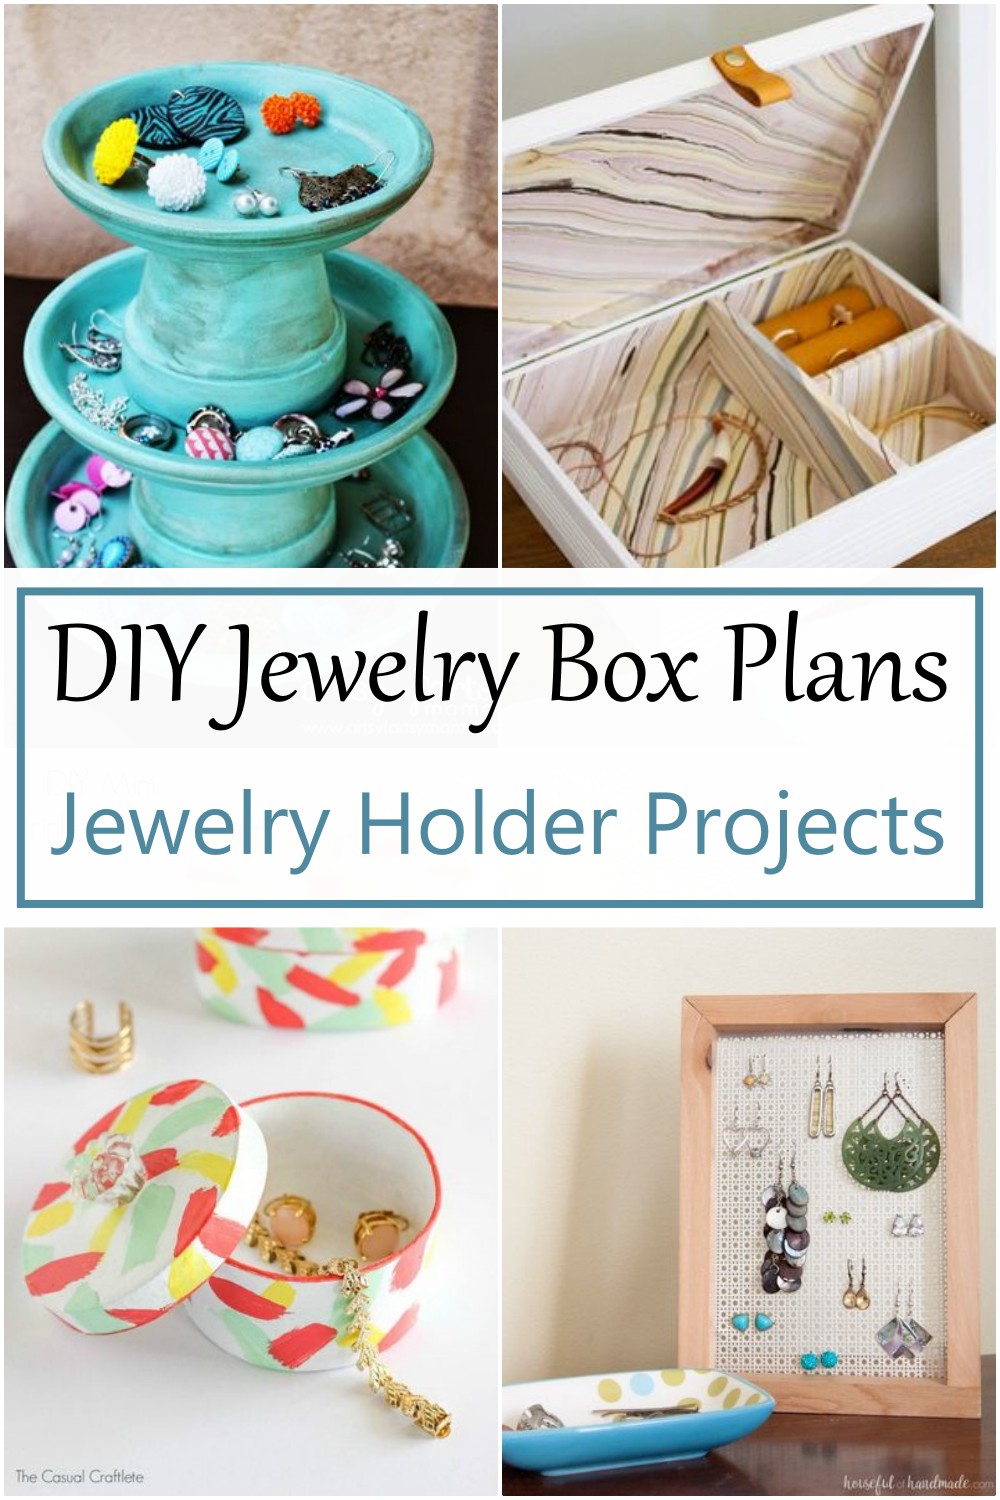 DIY Mod Podge Box for Jewelry Storage - The Crafting Nook